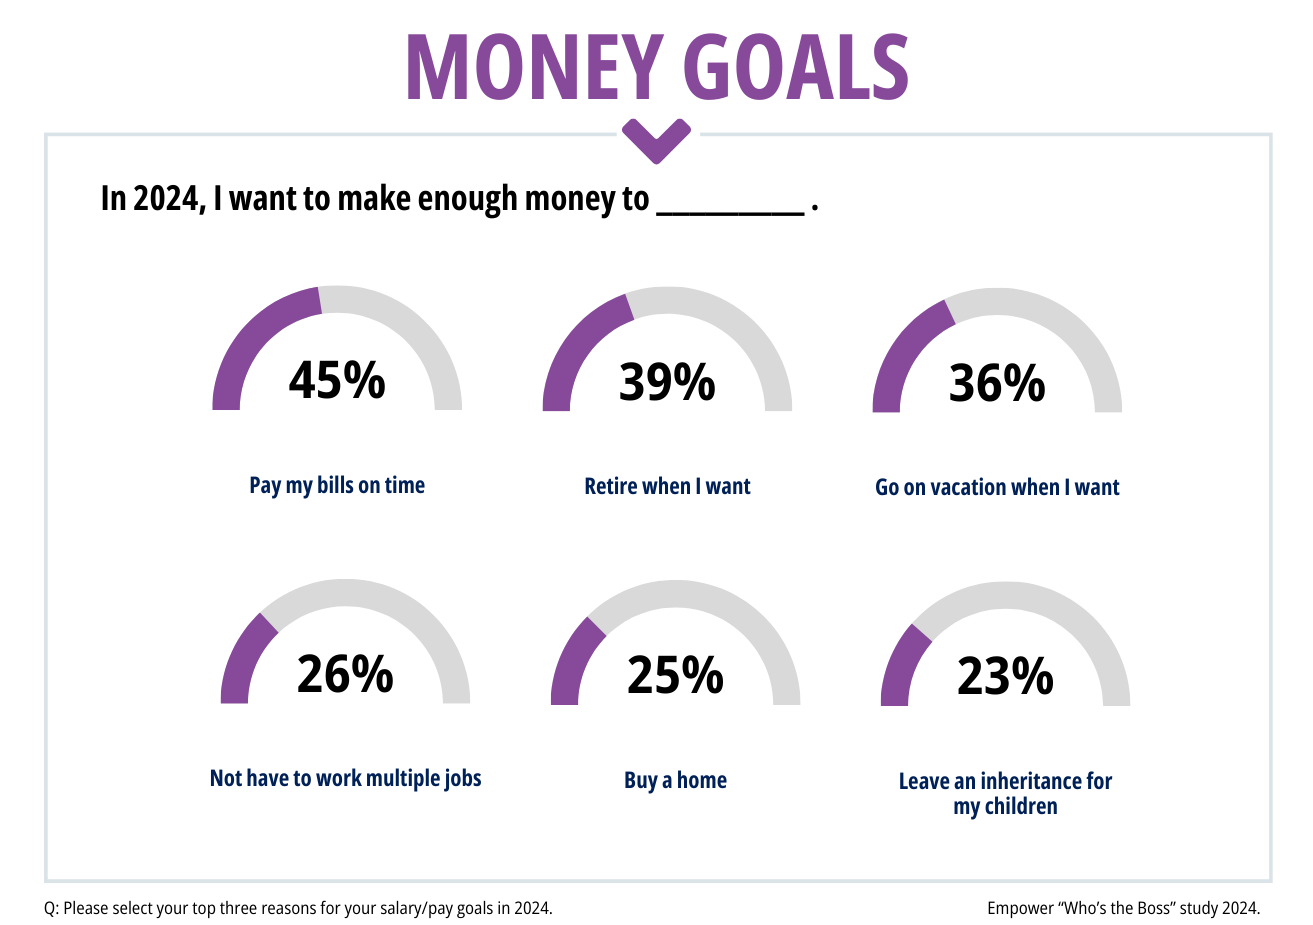 Survey results showing that in 2024, people want to make enough money to pay their bills on time (45%), retire when they want (39%), and go on vacation when they want (36%).